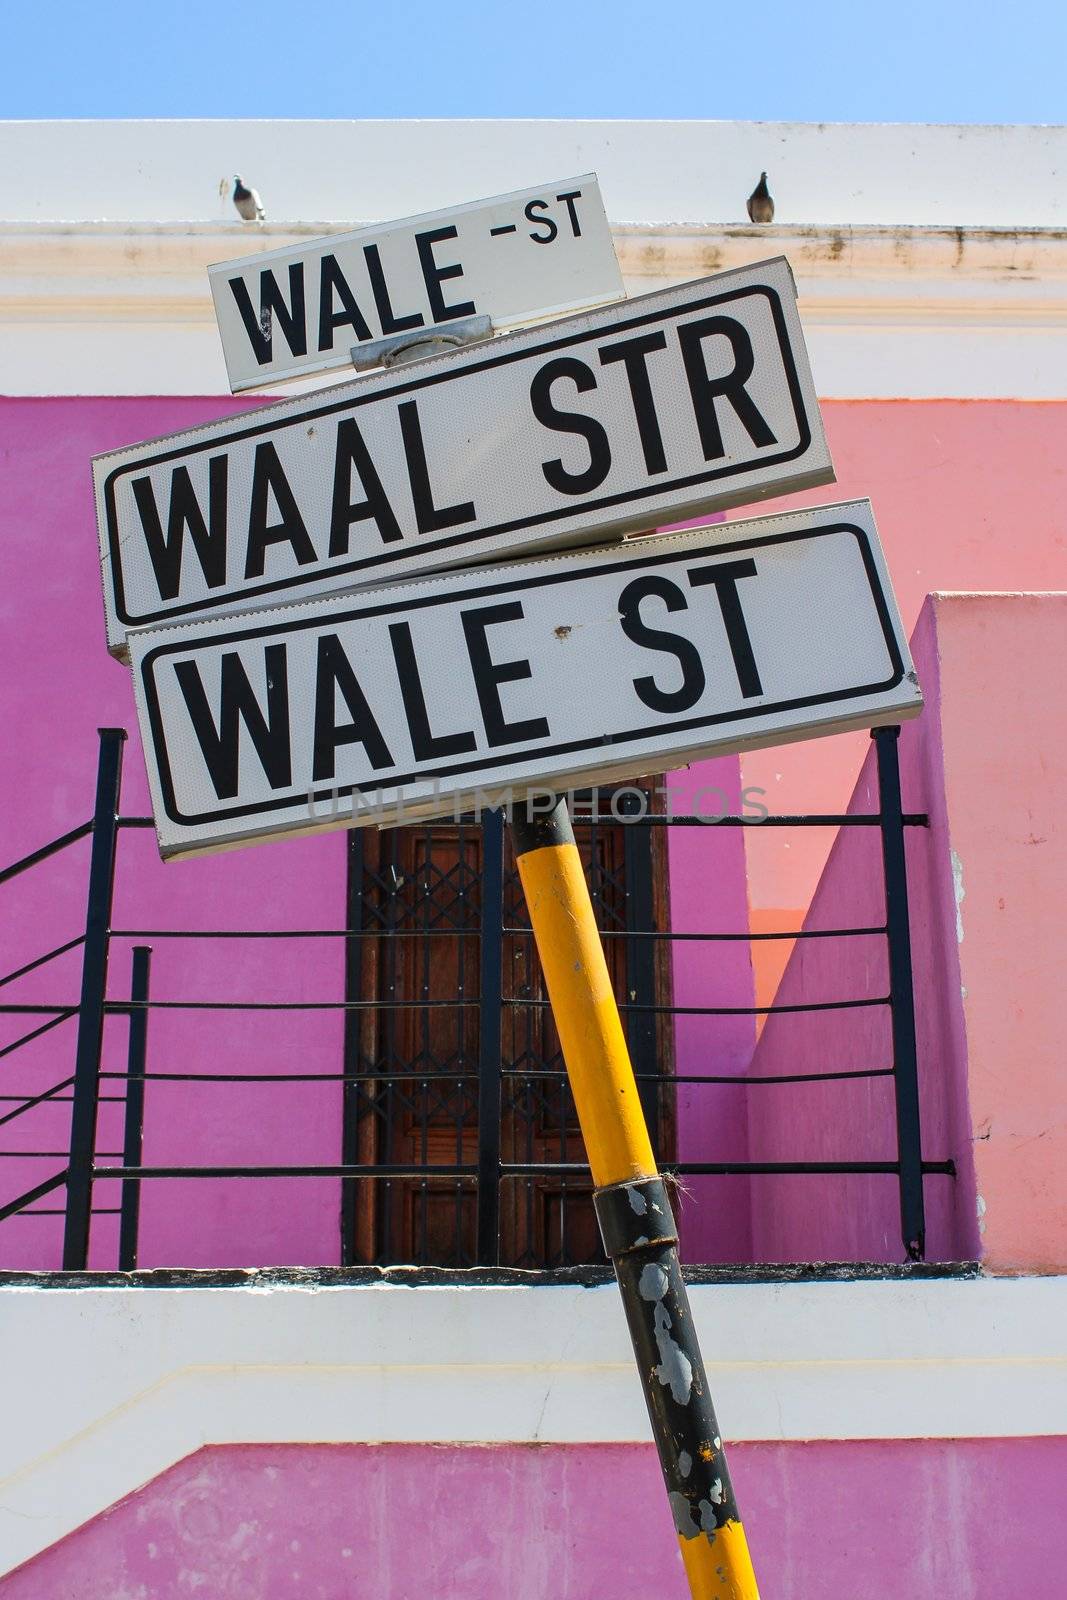 Wale street sign post in Cape Town, South Africa